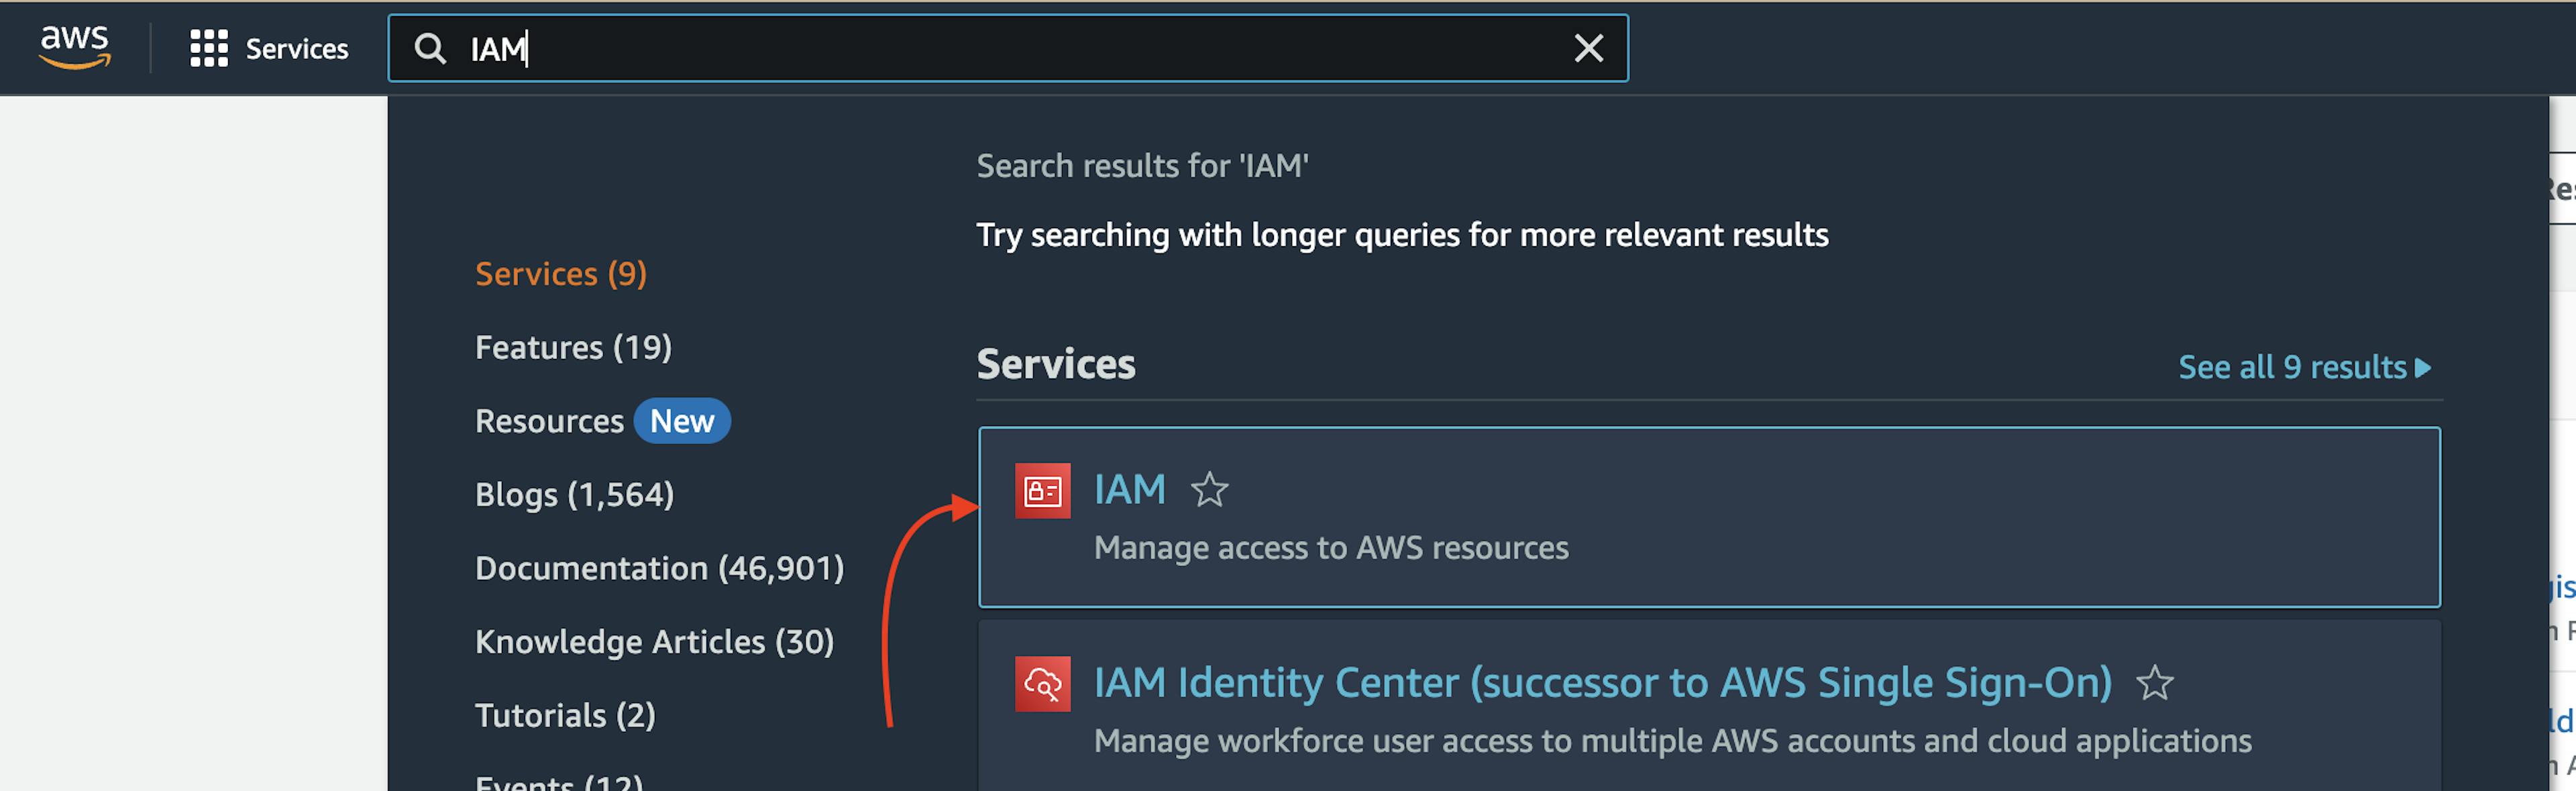 The screenshot of AWS web page with the pointer to "IAM"